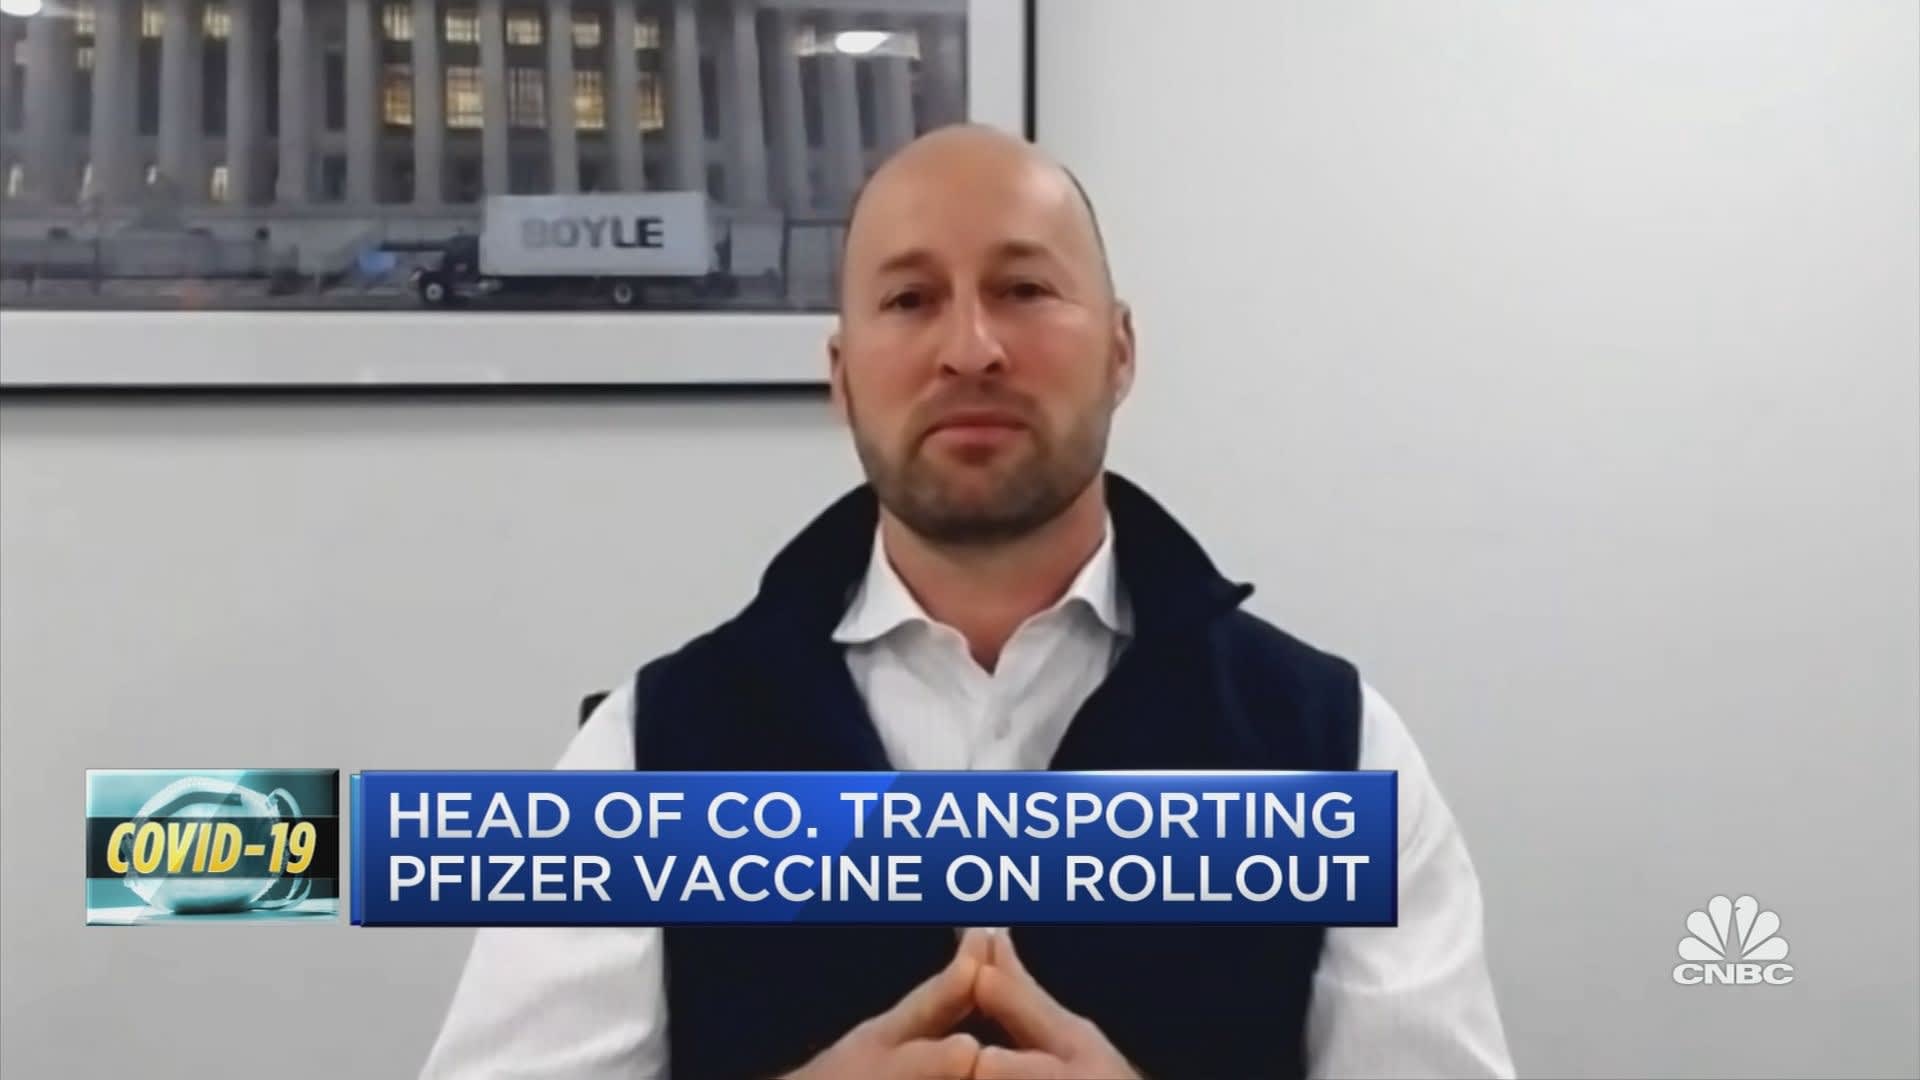 Head of trucking company transporting Pfizer vaccine discusses the first day of distribution